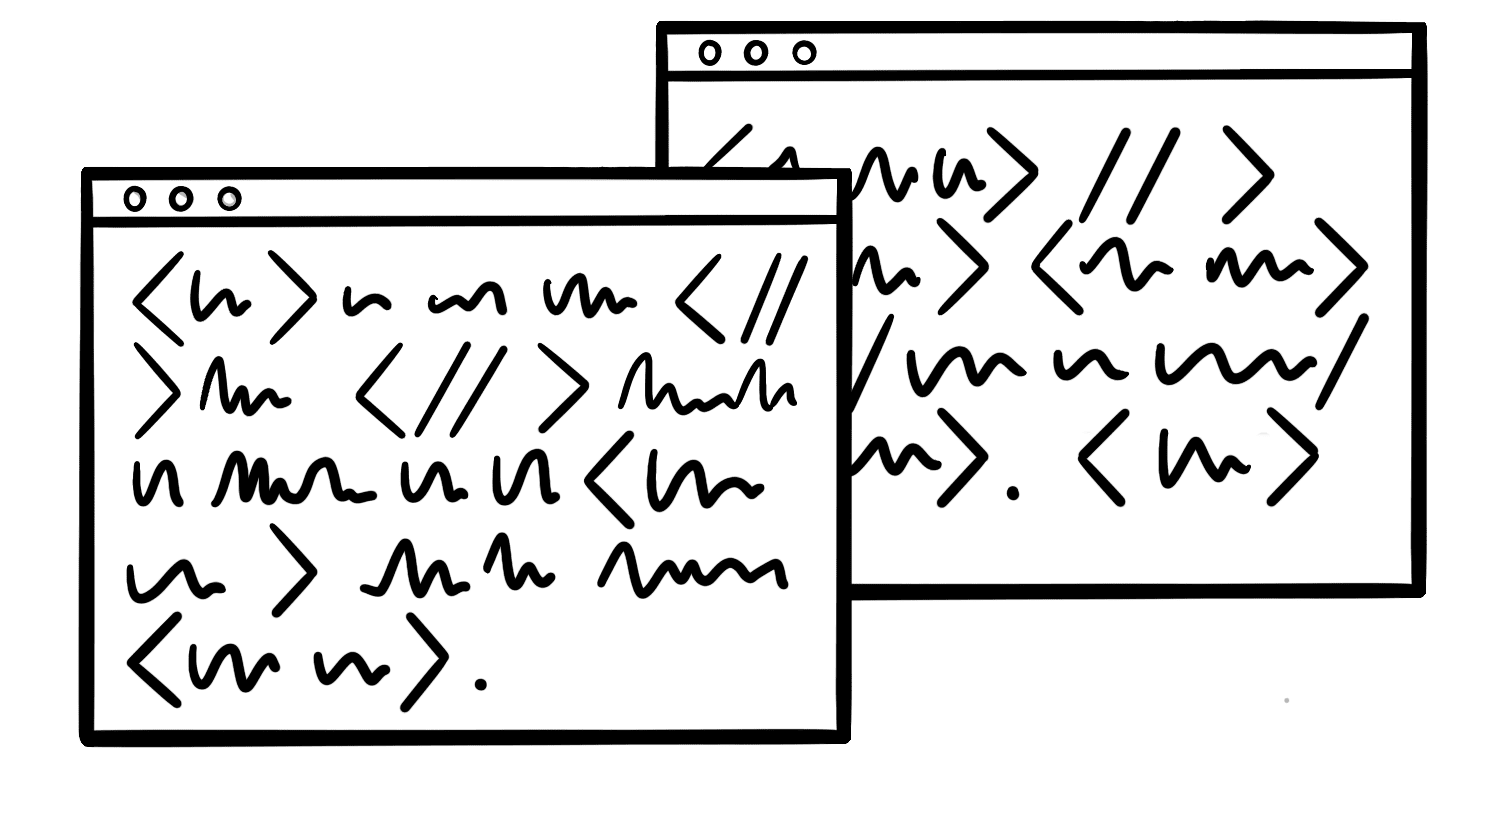 Illustration: Two document windows are side by side, showing a representation of semantic markup that provides content information for assistive technology users.